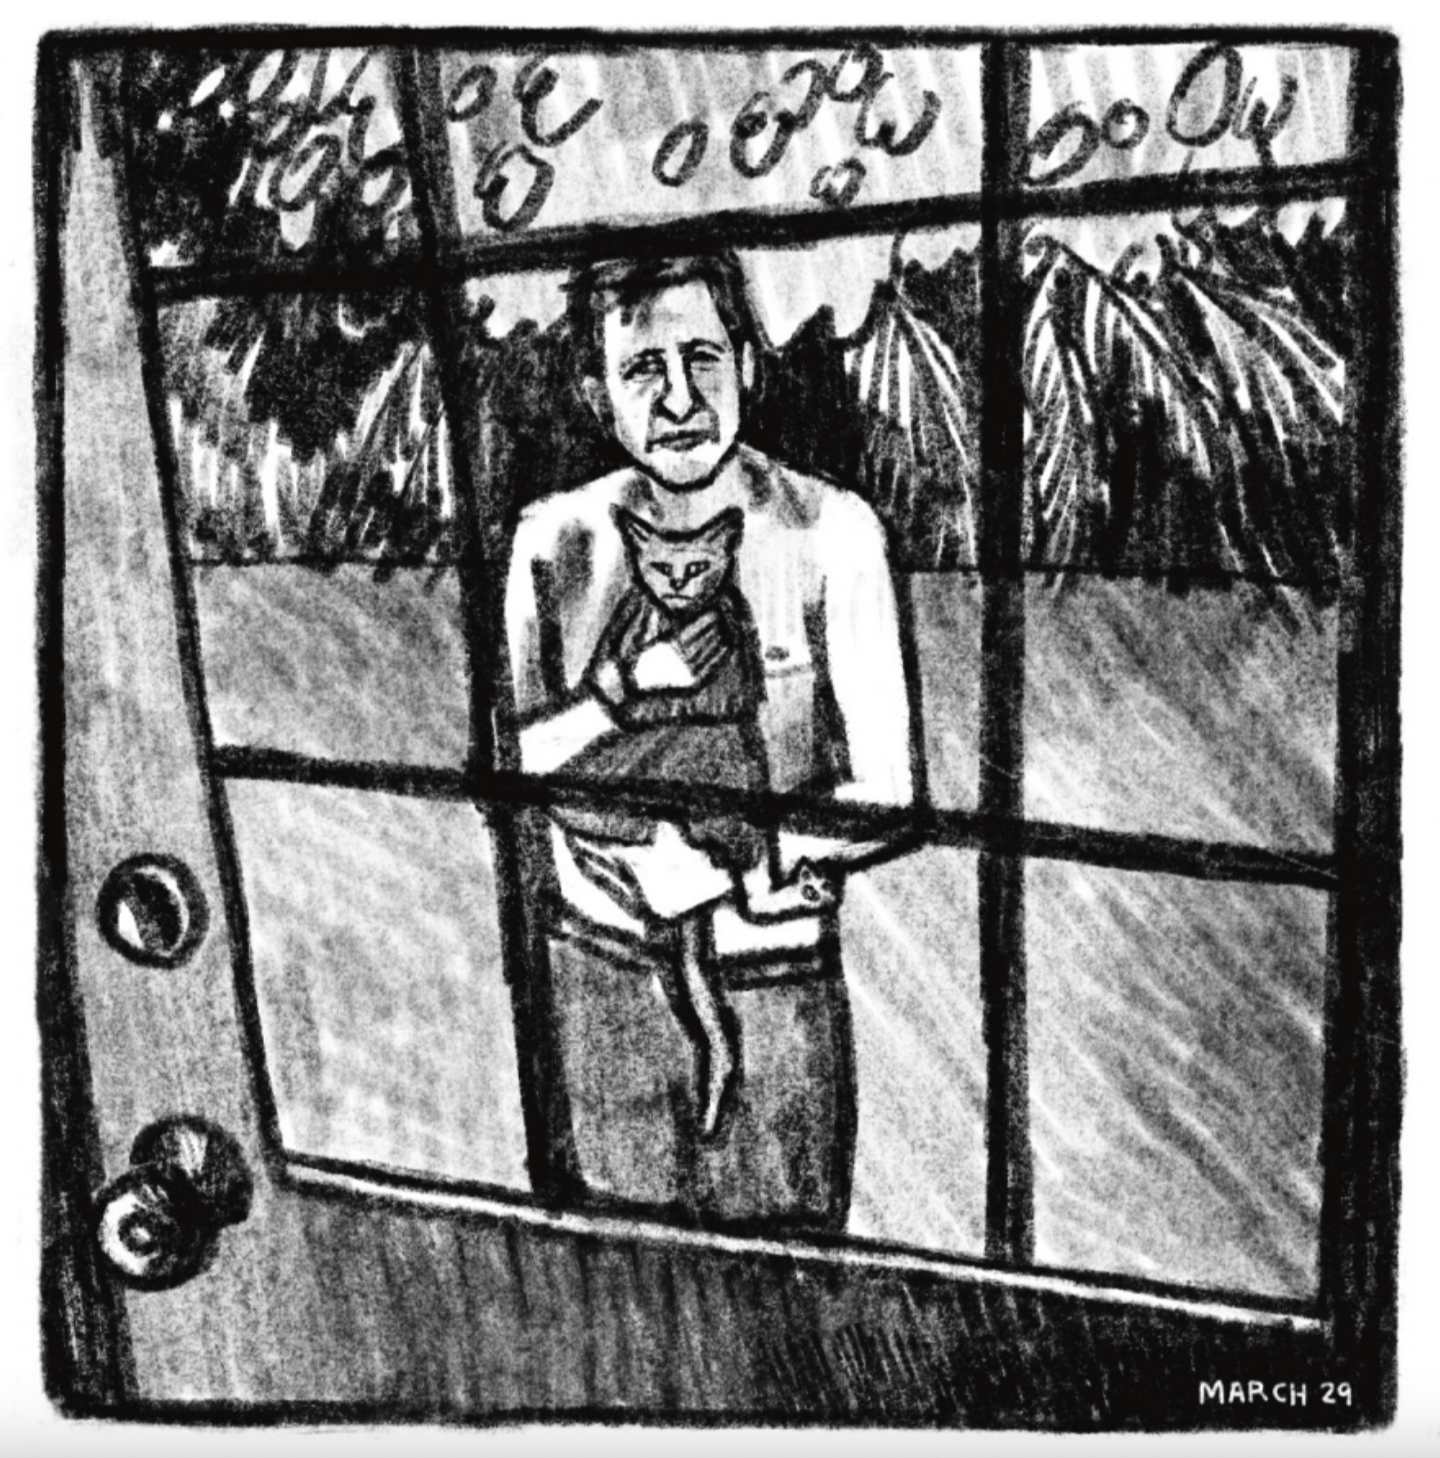 Tony stands outside holding a cat in his arms. We see him through a glass door. 
"March 29"